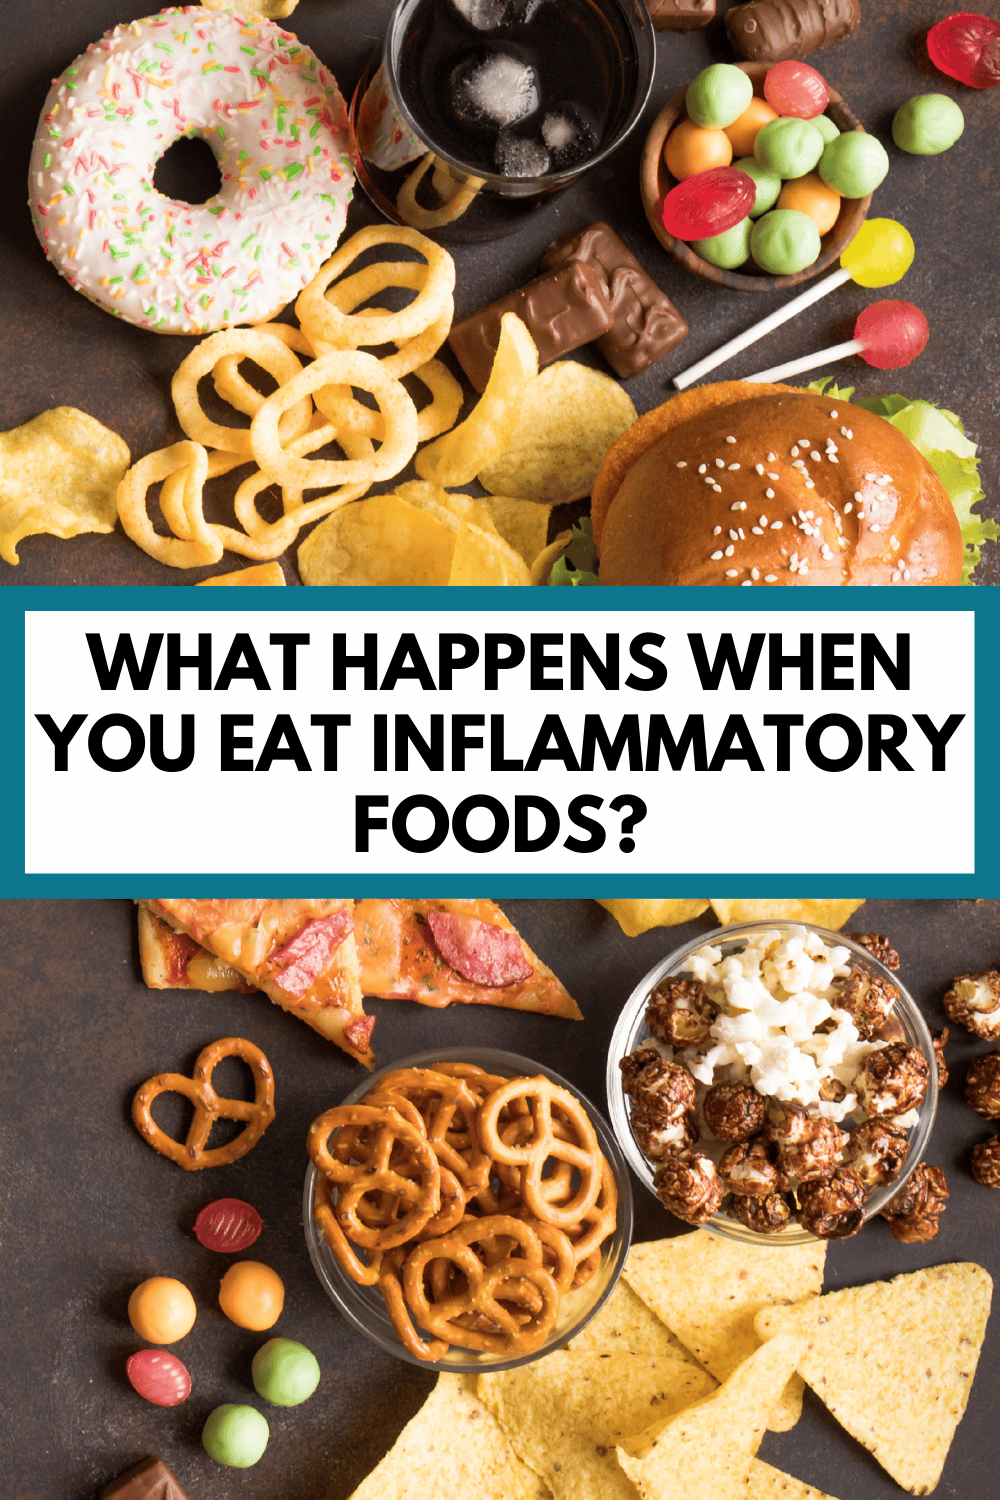 various "junk" foods with text overlay "what happens when you eat inflammatory foods"